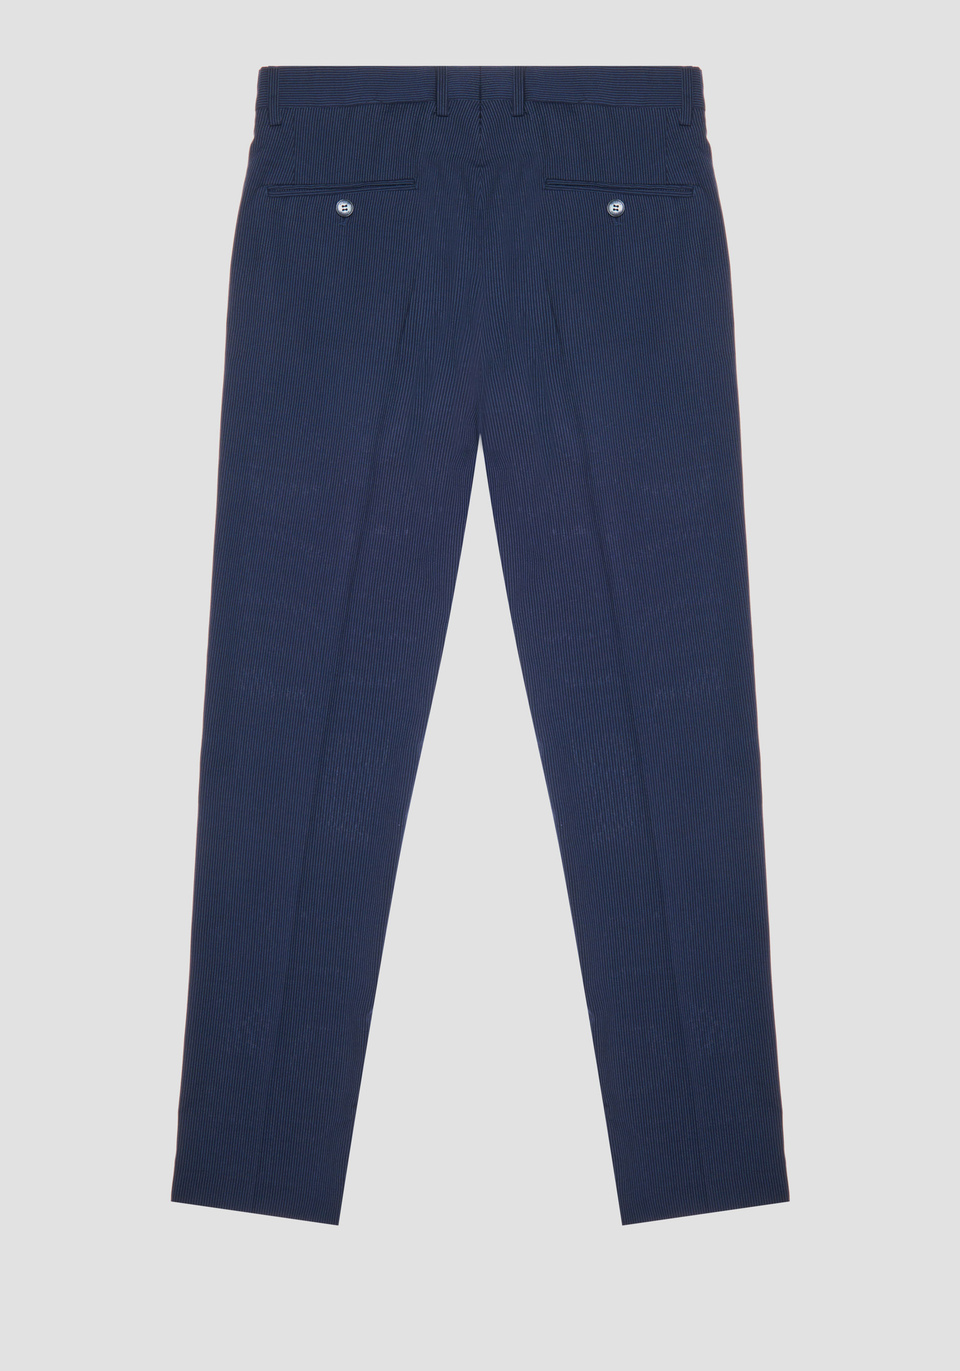 "BONNIE" SLIM-FIT TROUSERS IN STRETCH FABRIC WITH MICRO-WEAVE - Antony Morato Online Shop